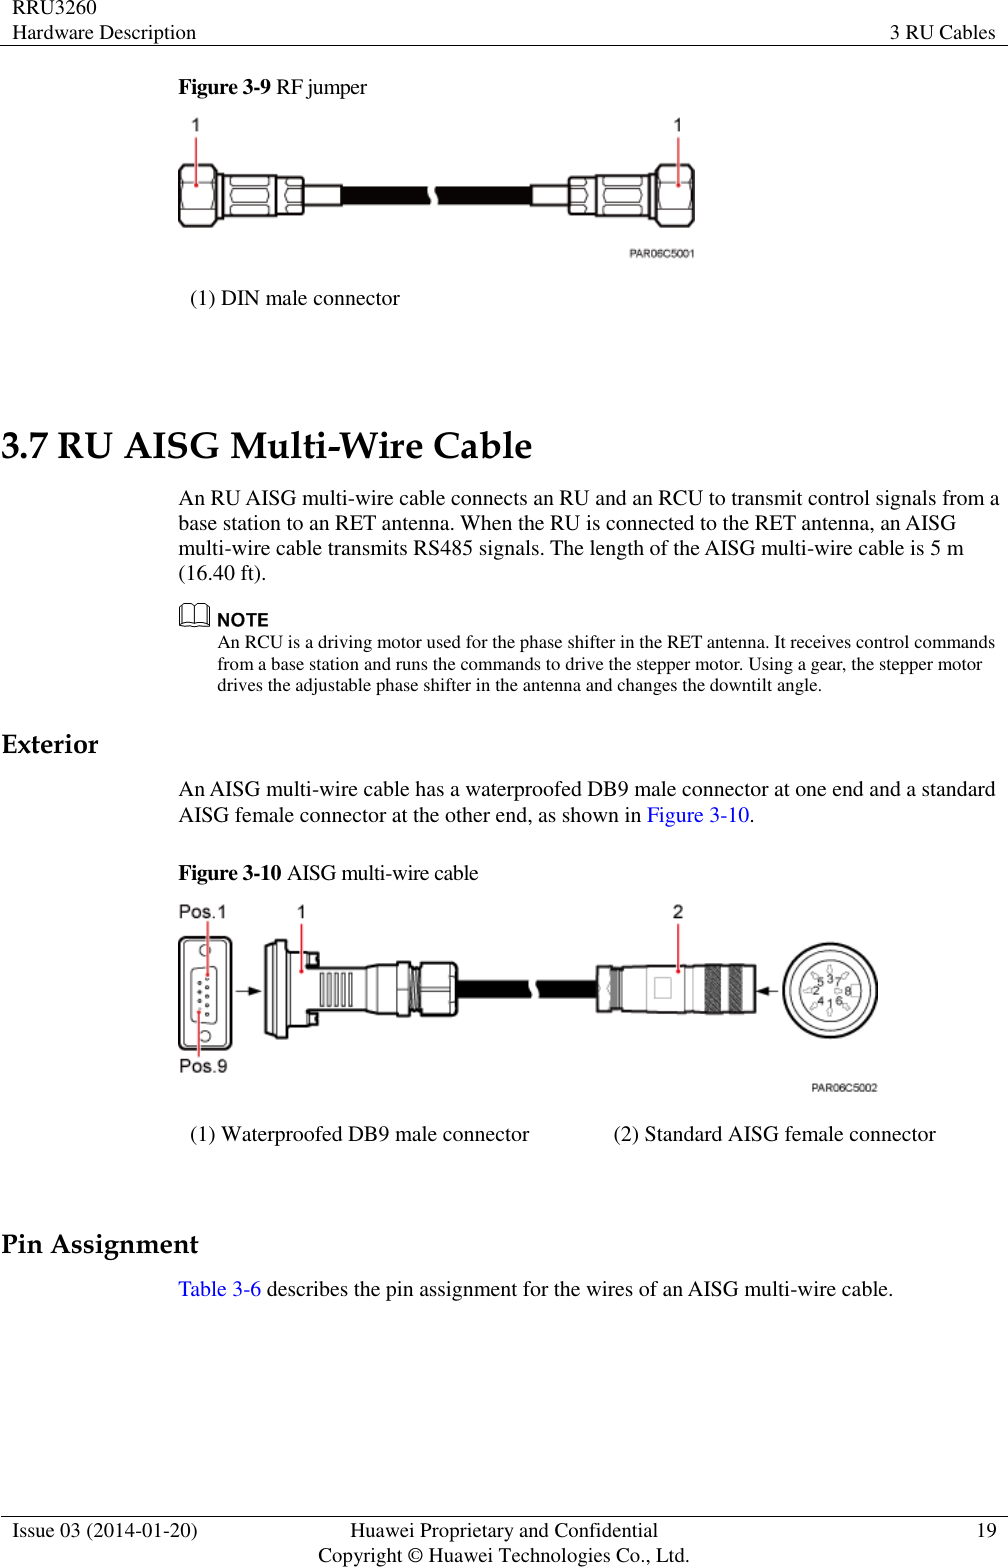 RRU3260 Hardware Description 3 RU Cables  Issue 03 (2014-01-20) Huawei Proprietary and Confidential                                     Copyright © Huawei Technologies Co., Ltd. 19  Figure 3-9 RF jumper  (1) DIN male connector  3.7 RU AISG Multi-Wire Cable An RU AISG multi-wire cable connects an RU and an RCU to transmit control signals from a base station to an RET antenna. When the RU is connected to the RET antenna, an AISG multi-wire cable transmits RS485 signals. The length of the AISG multi-wire cable is 5 m (16.40 ft).  An RCU is a driving motor used for the phase shifter in the RET antenna. It receives control commands from a base station and runs the commands to drive the stepper motor. Using a gear, the stepper motor drives the adjustable phase shifter in the antenna and changes the downtilt angle. Exterior An AISG multi-wire cable has a waterproofed DB9 male connector at one end and a standard AISG female connector at the other end, as shown in Figure 3-10. Figure 3-10 AISG multi-wire cable  (1) Waterproofed DB9 male connector (2) Standard AISG female connector  Pin Assignment Table 3-6 describes the pin assignment for the wires of an AISG multi-wire cable. 